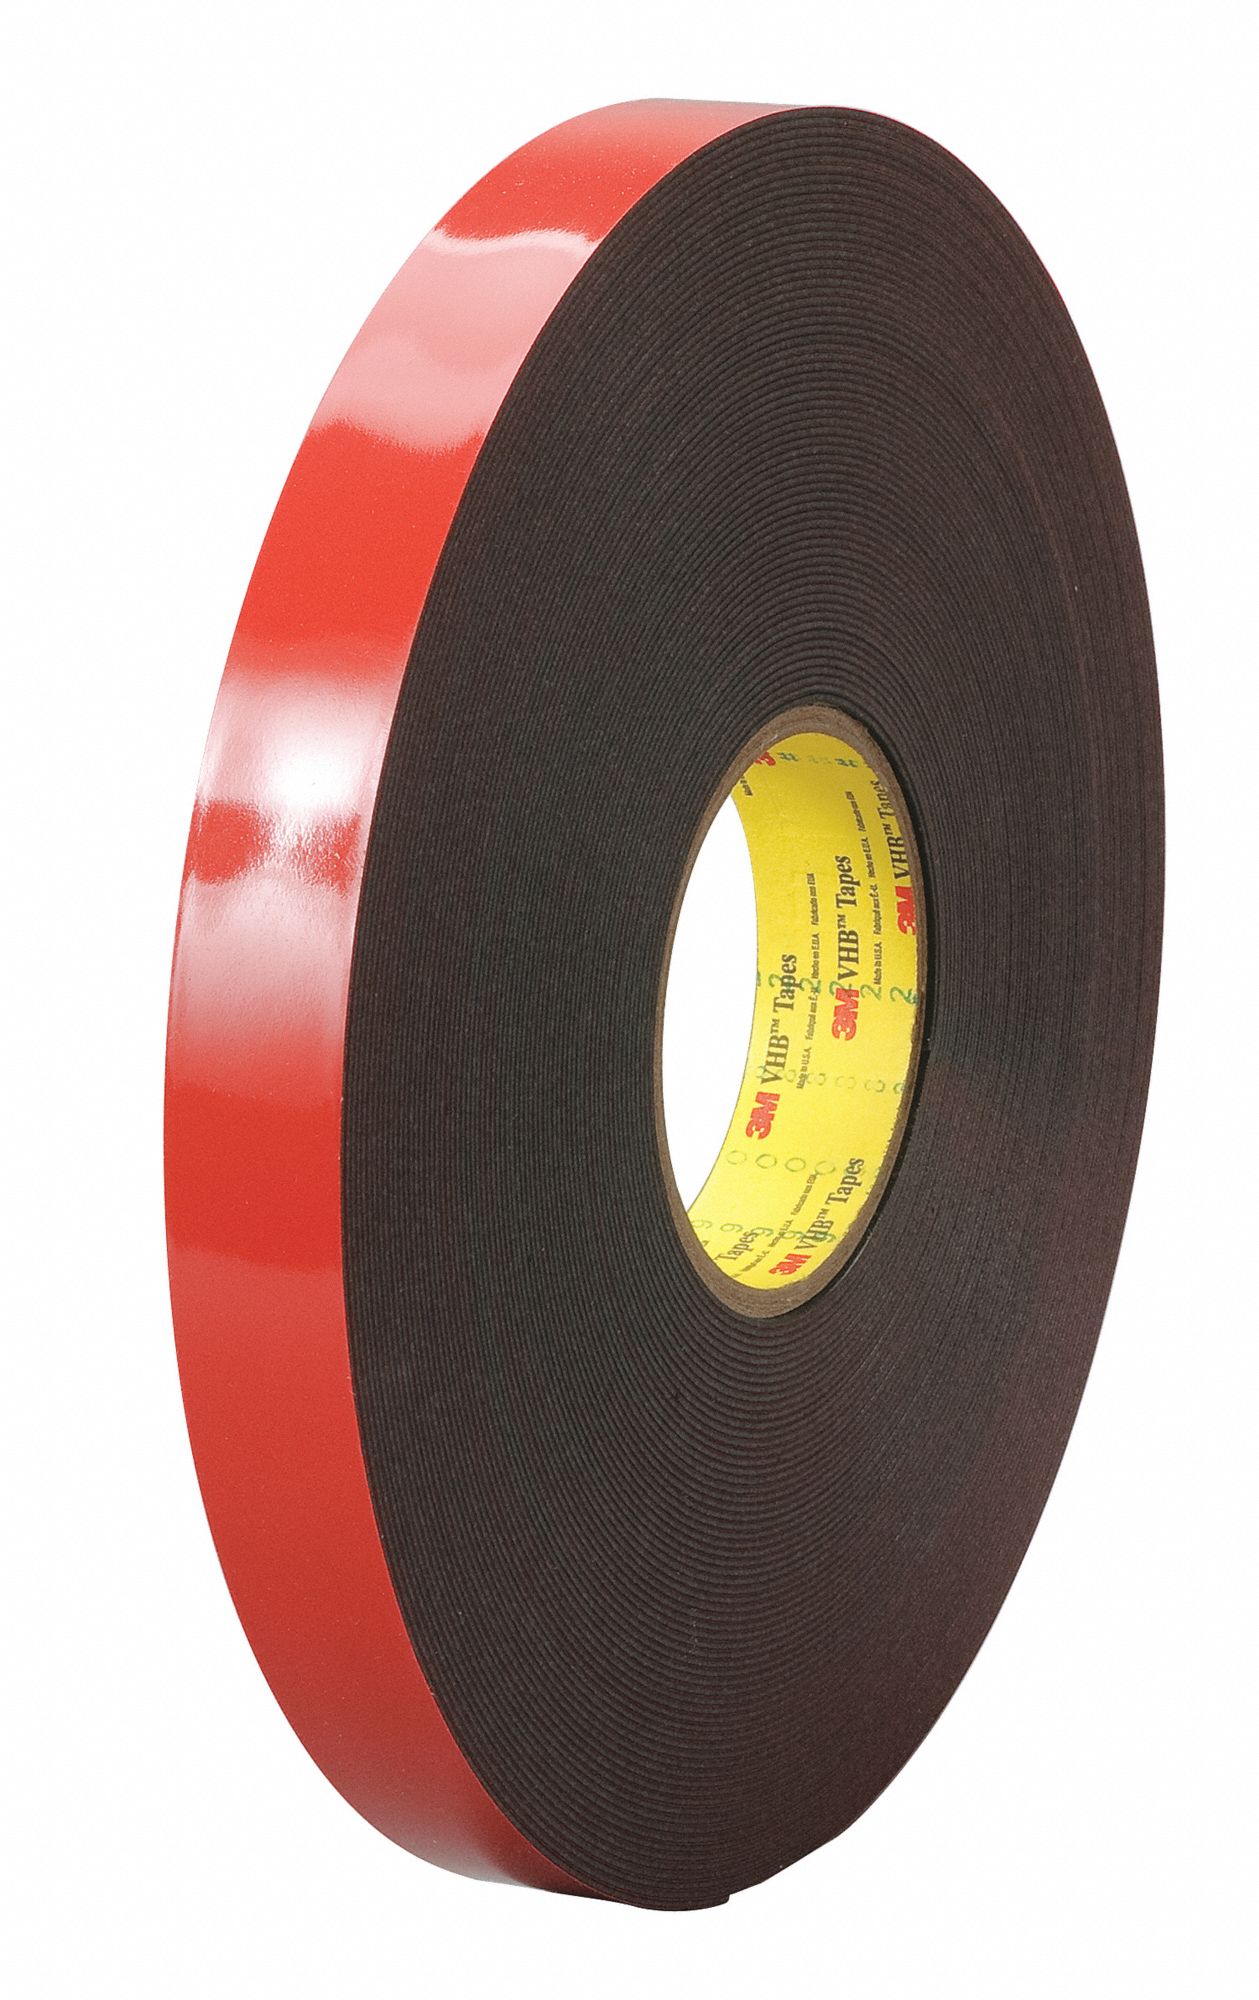 Acrylic Foam Double Sided VHB Tape, Acrylic Adhesive, 45.00 mil Thick ...